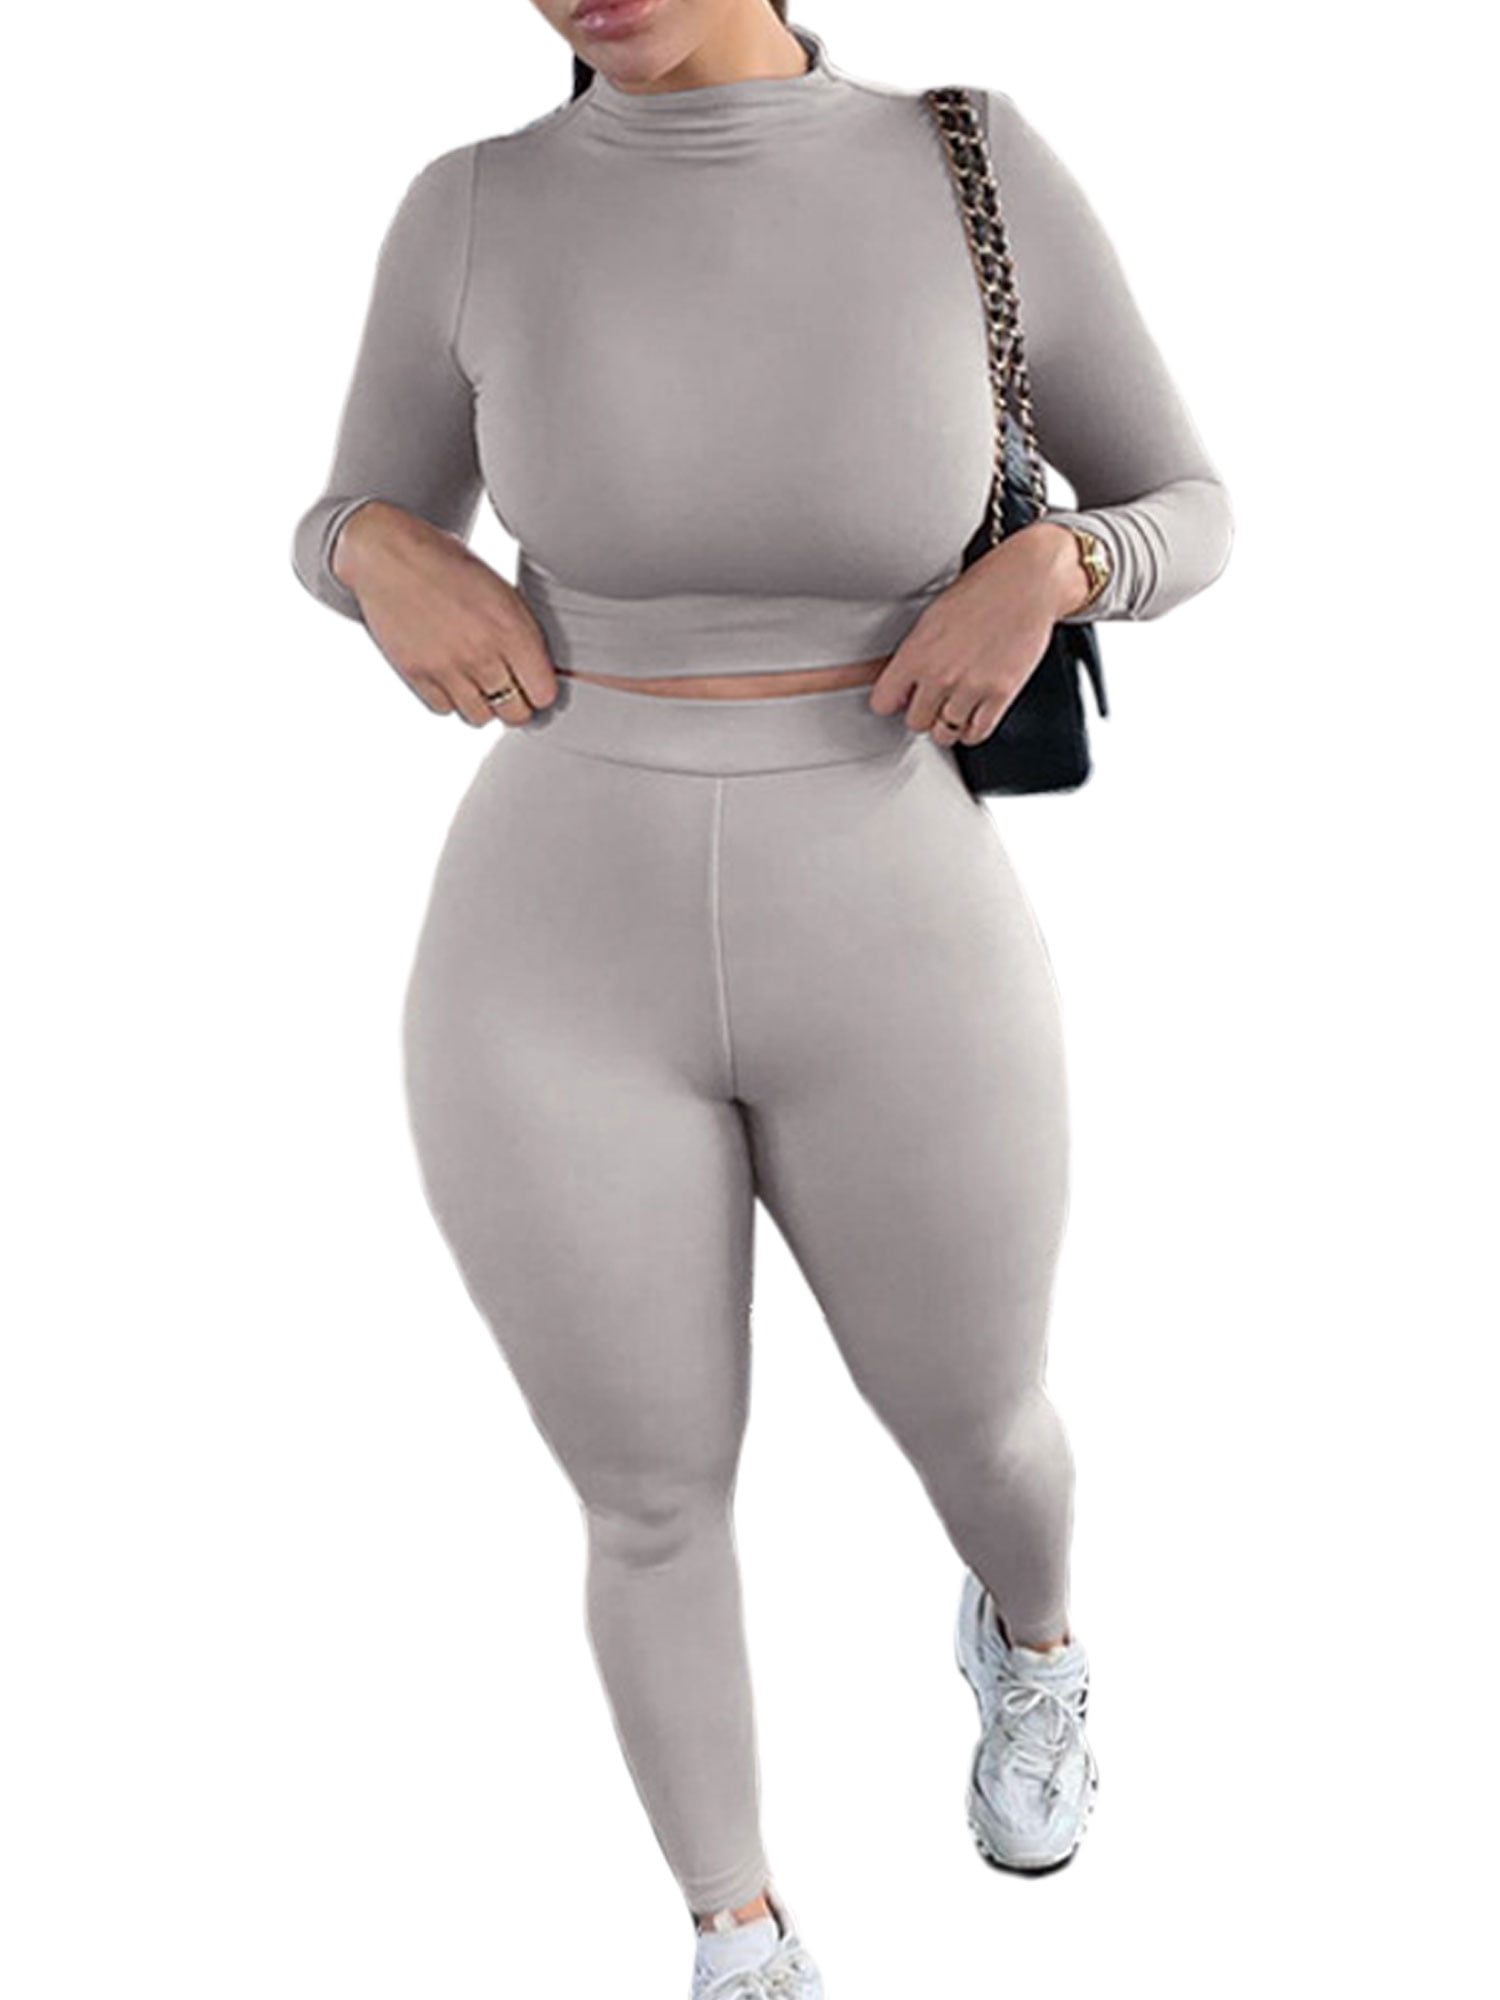 Womens Yoga Sets 2 Piece Workout High Waist Yagapants and Sports Tops Gym Sport Suit Skintight Running Tracksuit 